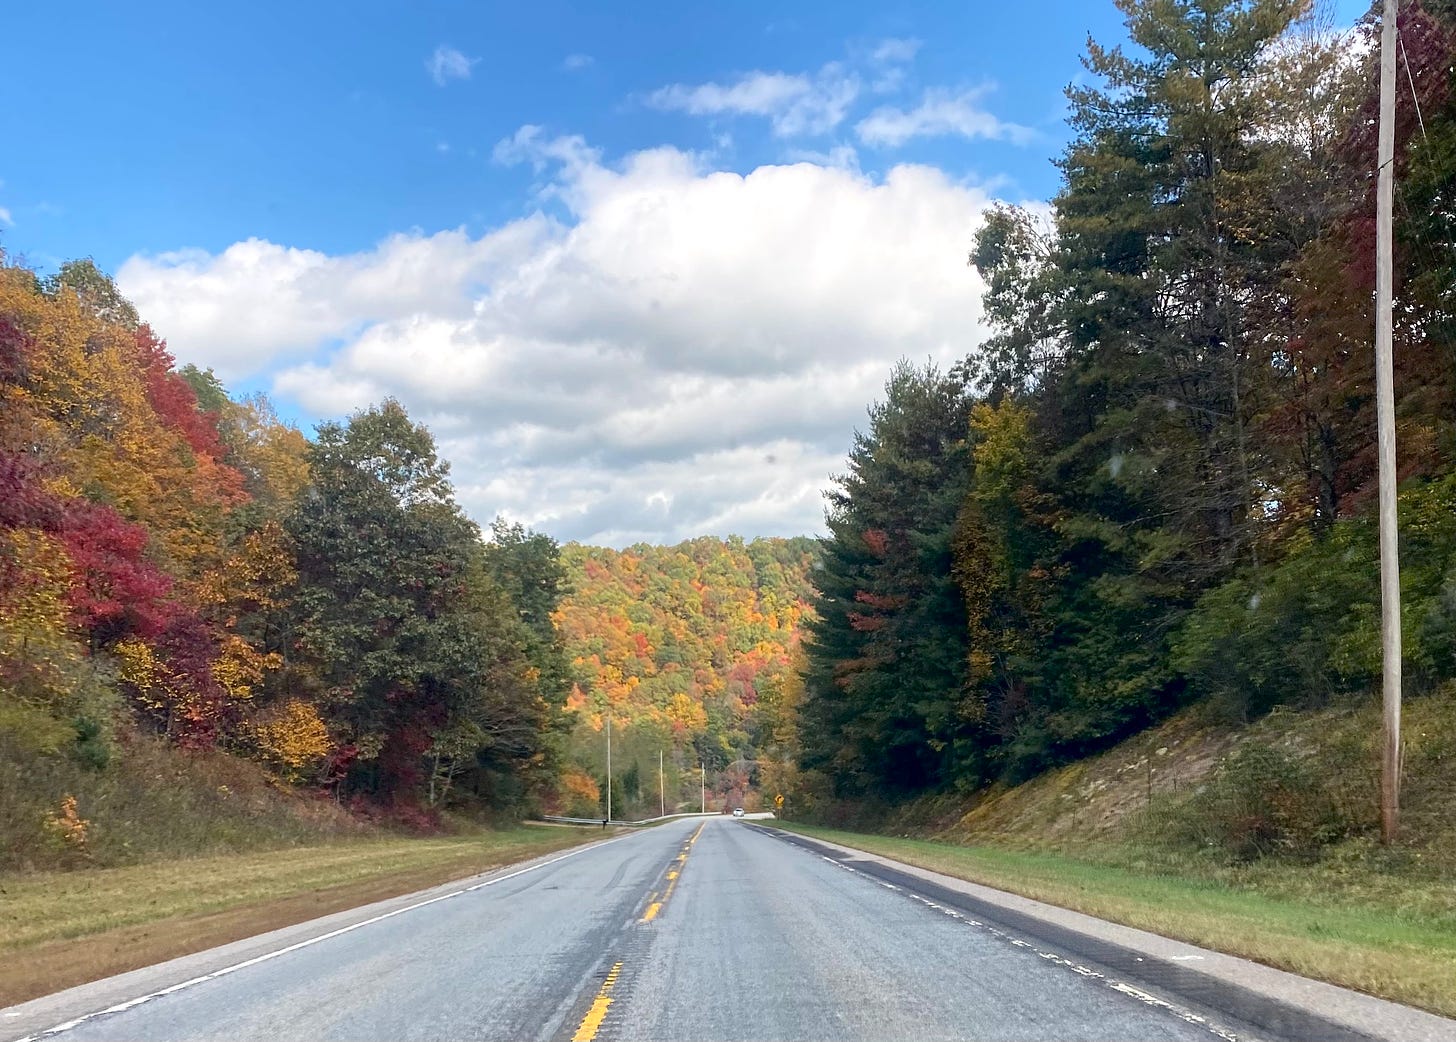 An empty road surrounded by trees of various colors, backdropped by a cloudy blue sky.